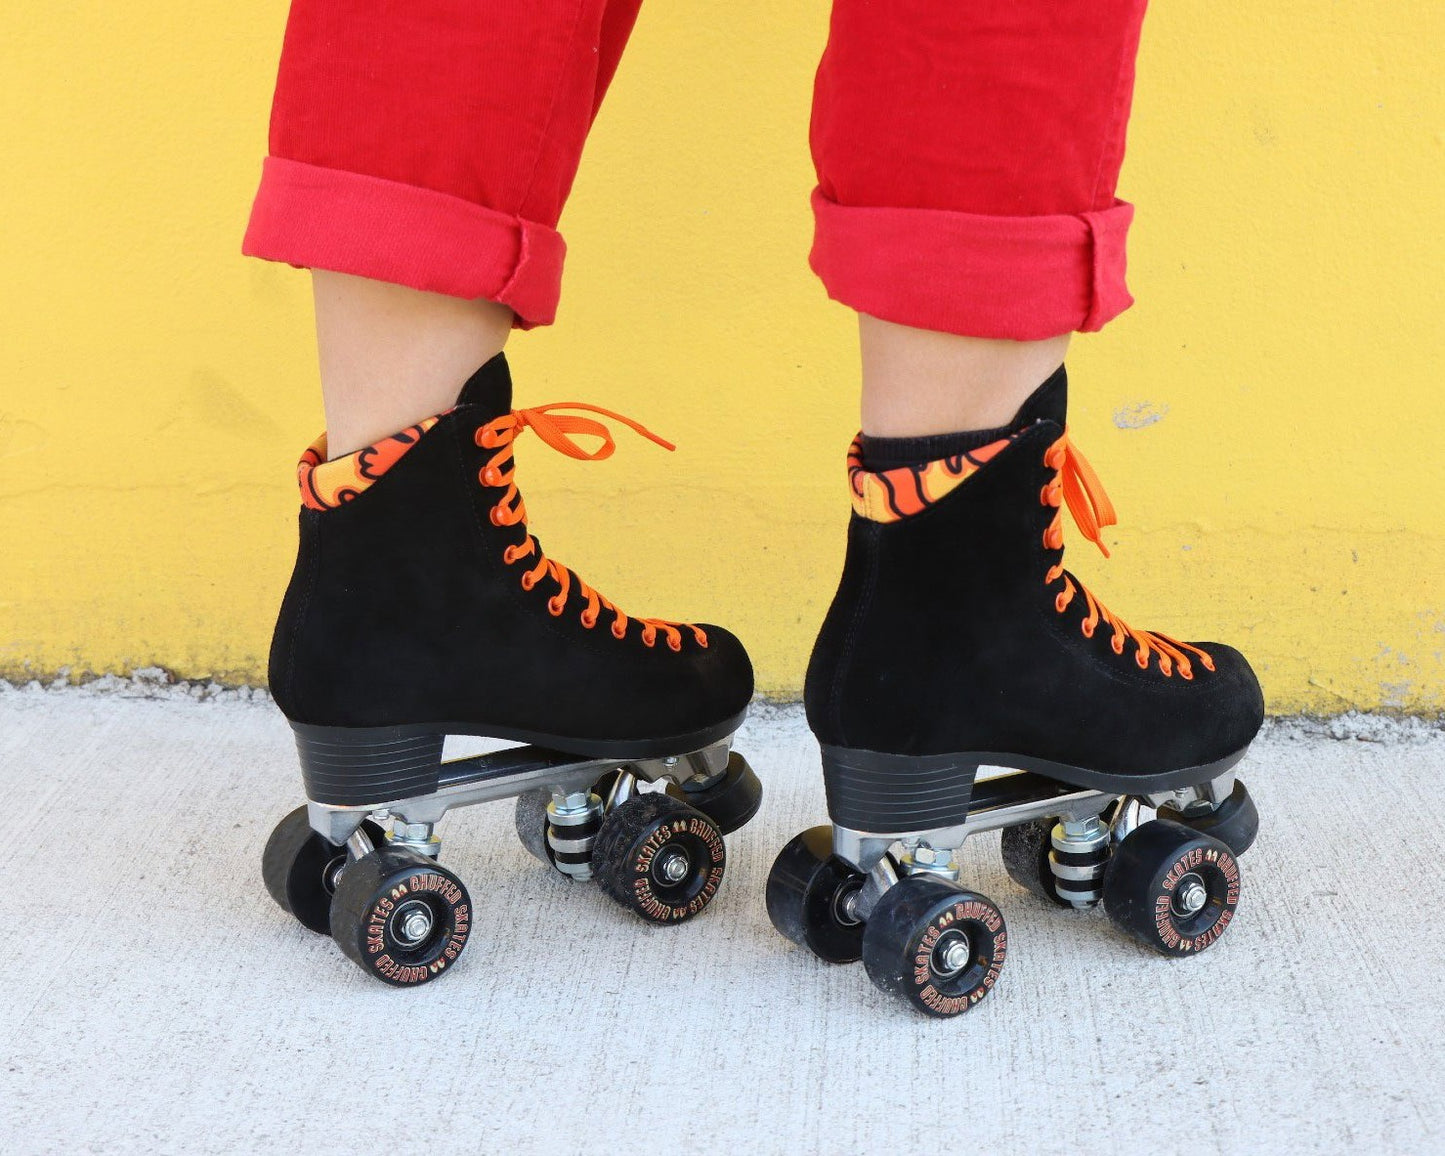 Chuffed Skates black roller skates  with yellow background